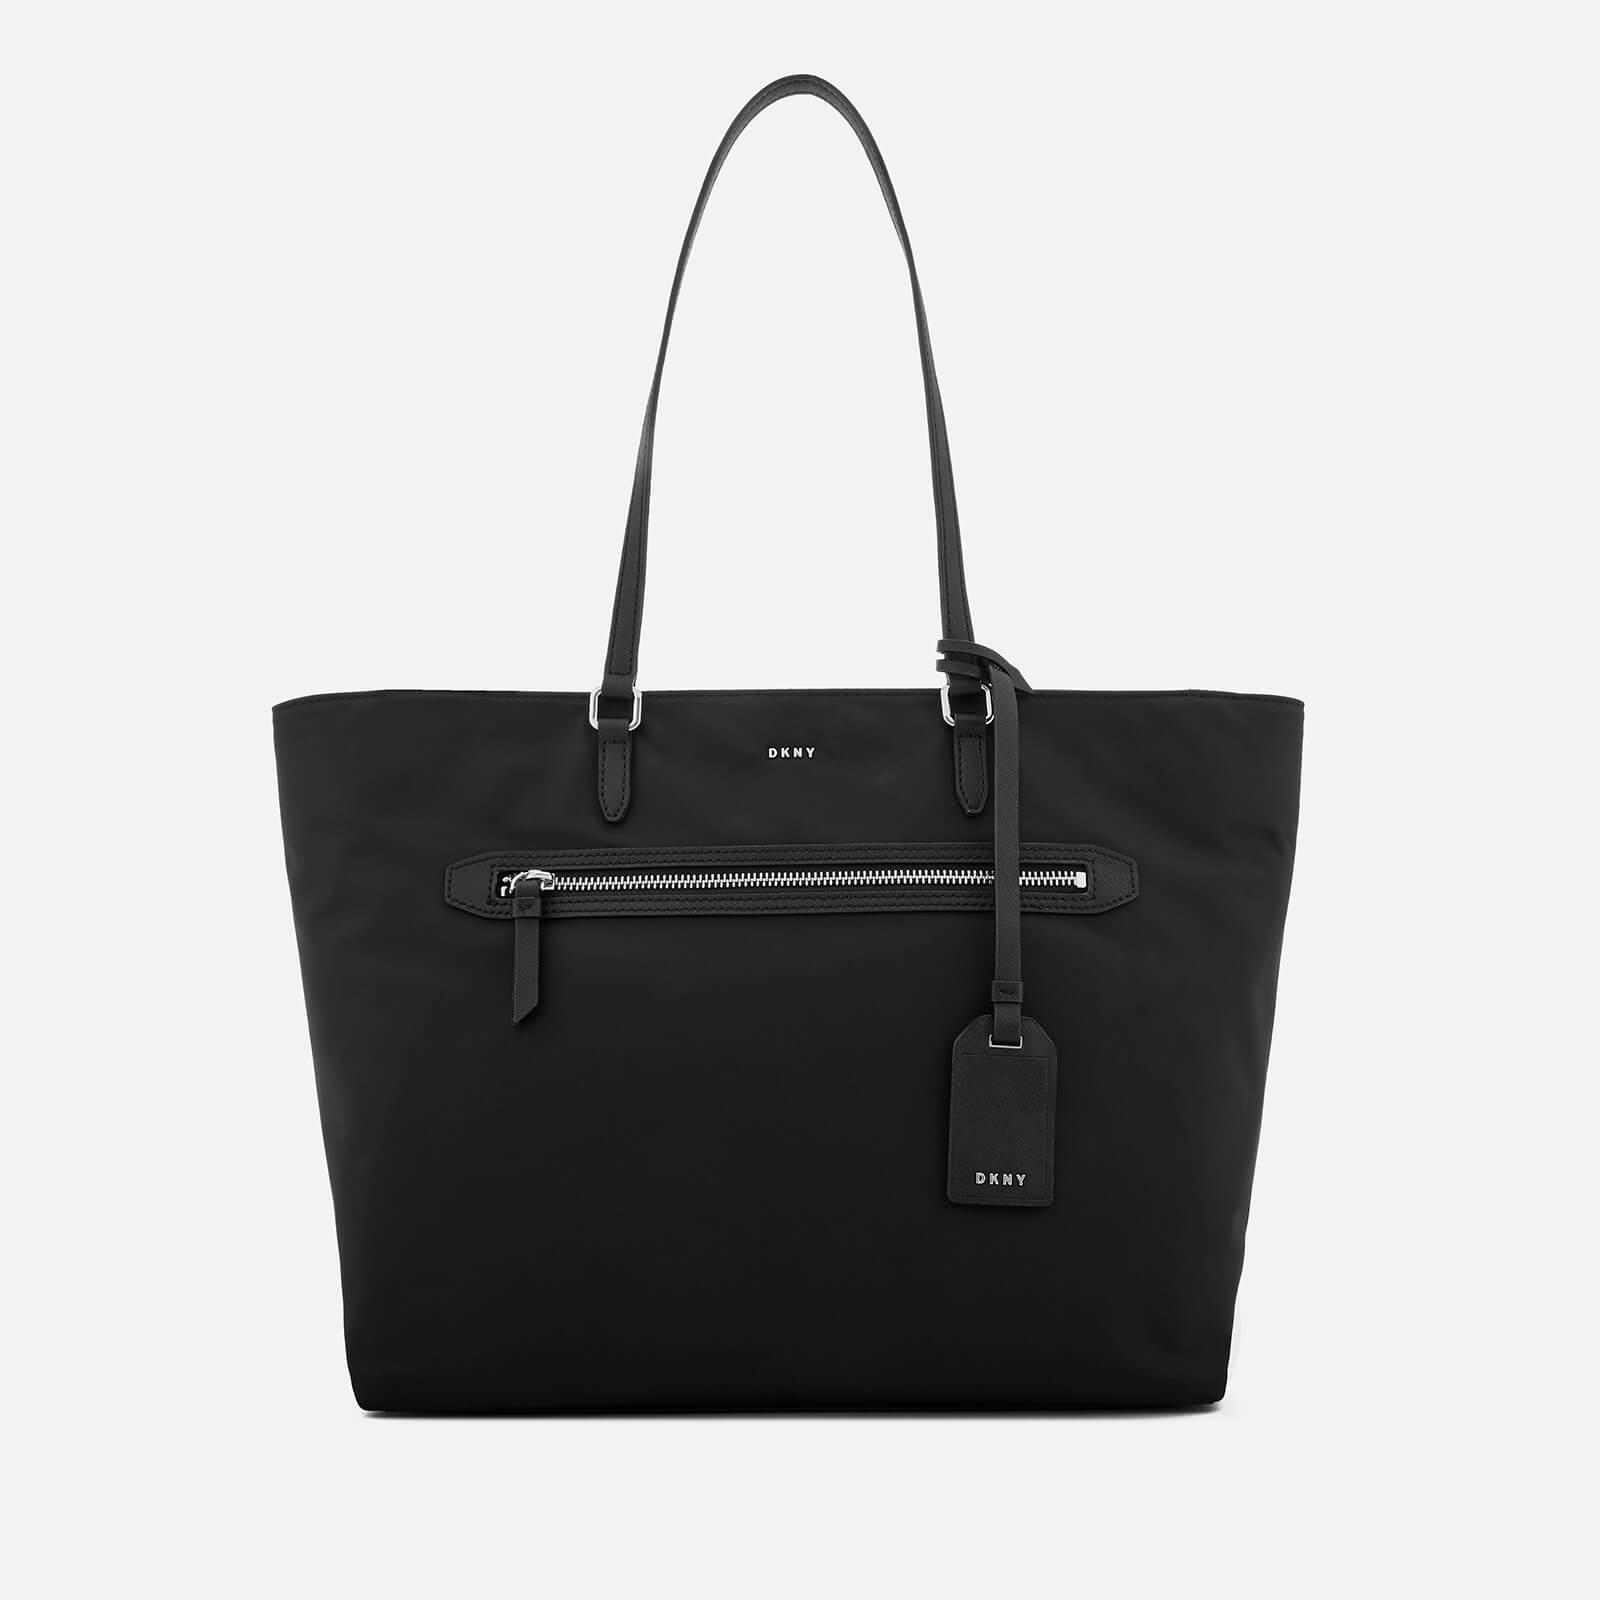 DKNY Casey Large Tote Bag in Black - Lyst